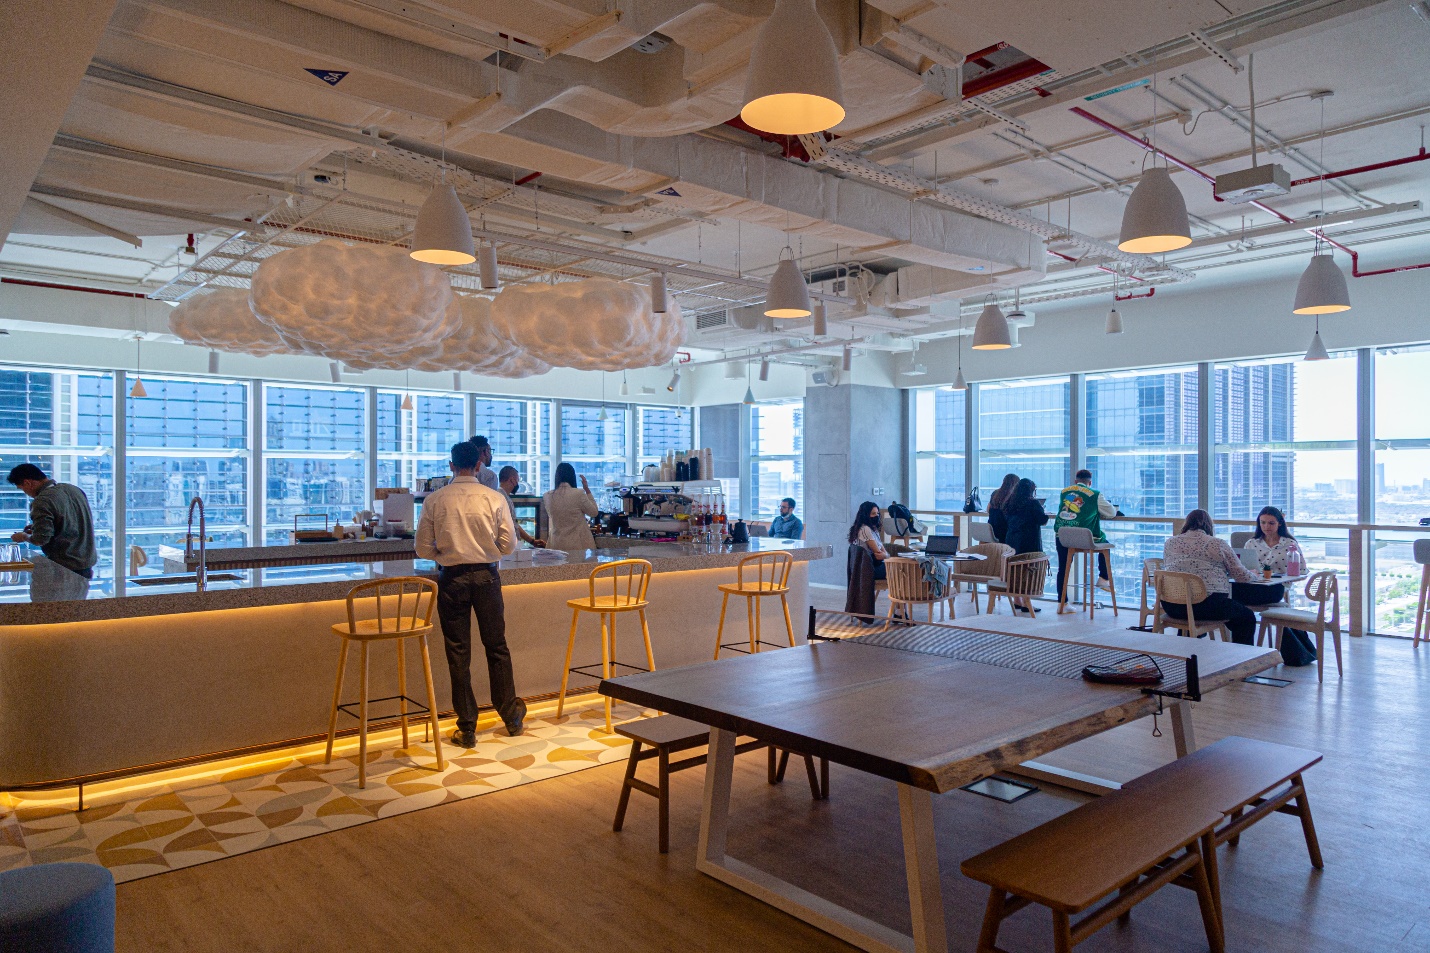 An Inspiring Space For Creative Entrepreneurs And Freelance Talents: Cloud Spaces, Abu Dhabi’s Innovative Workspace Solutions Provider, Is Delighted To Expand To Abu Dhabi Global Mark (ADGM) And Open A New Branch On Al Maryah Island